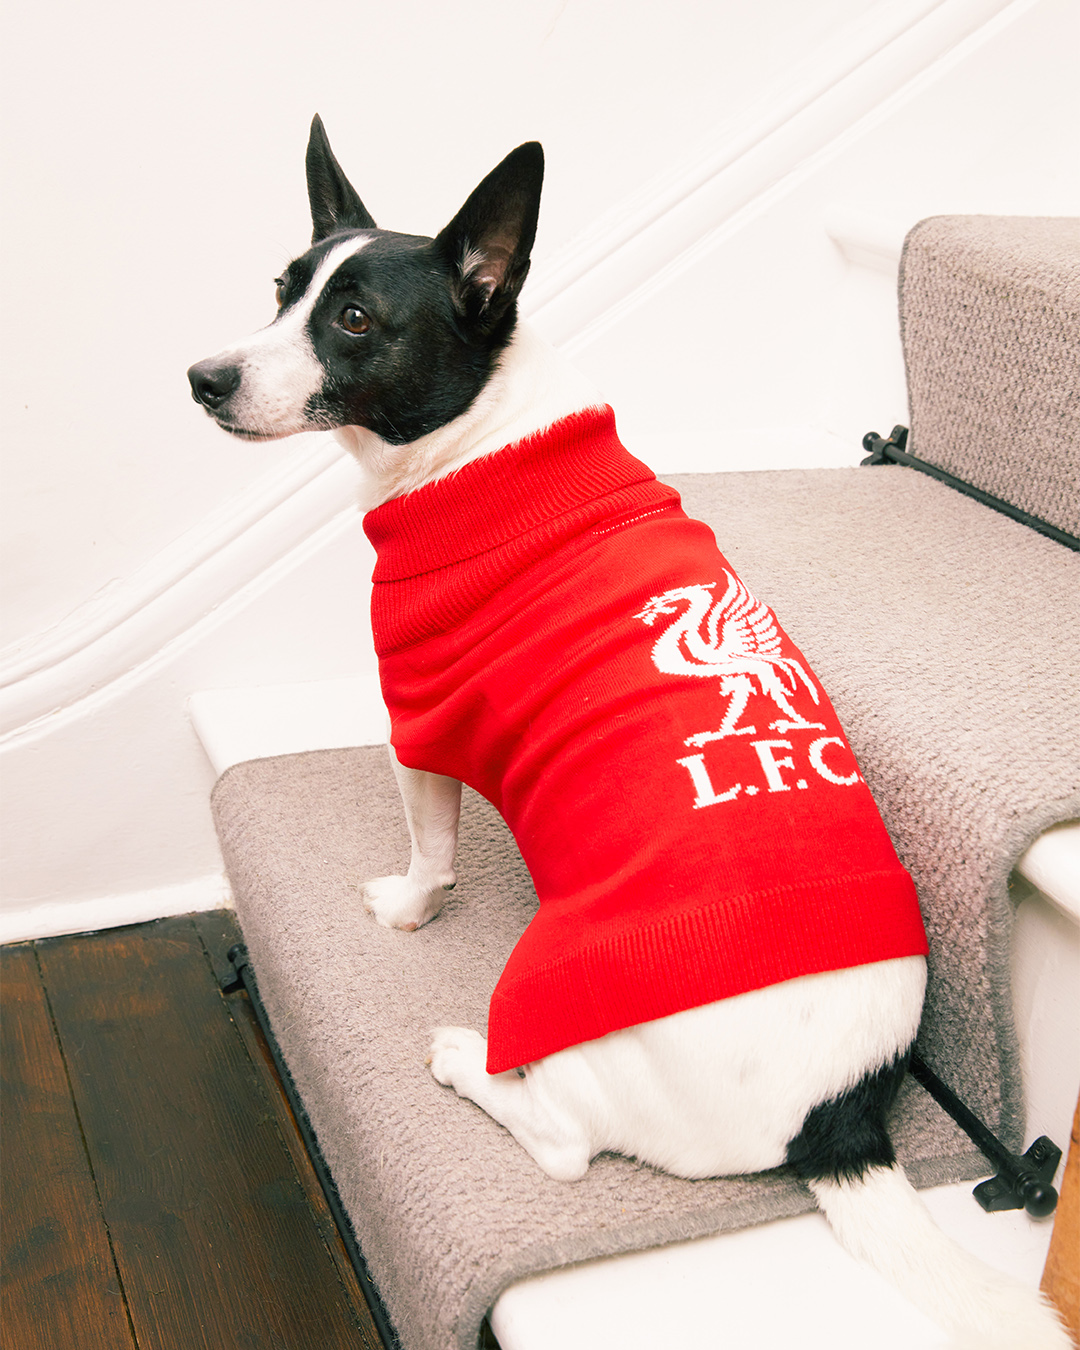 klipning eftertiden Musling Liverpool FC Retail on Twitter: "How paw-some are our LFC Pet Accessories,  Reds?! 🐾🐶 Shop the full collection in-store and online now at  https://t.co/F4Y5781O7E. #LFC #LiverpoolFC https://t.co/31afoaJ4qk" /  Twitter